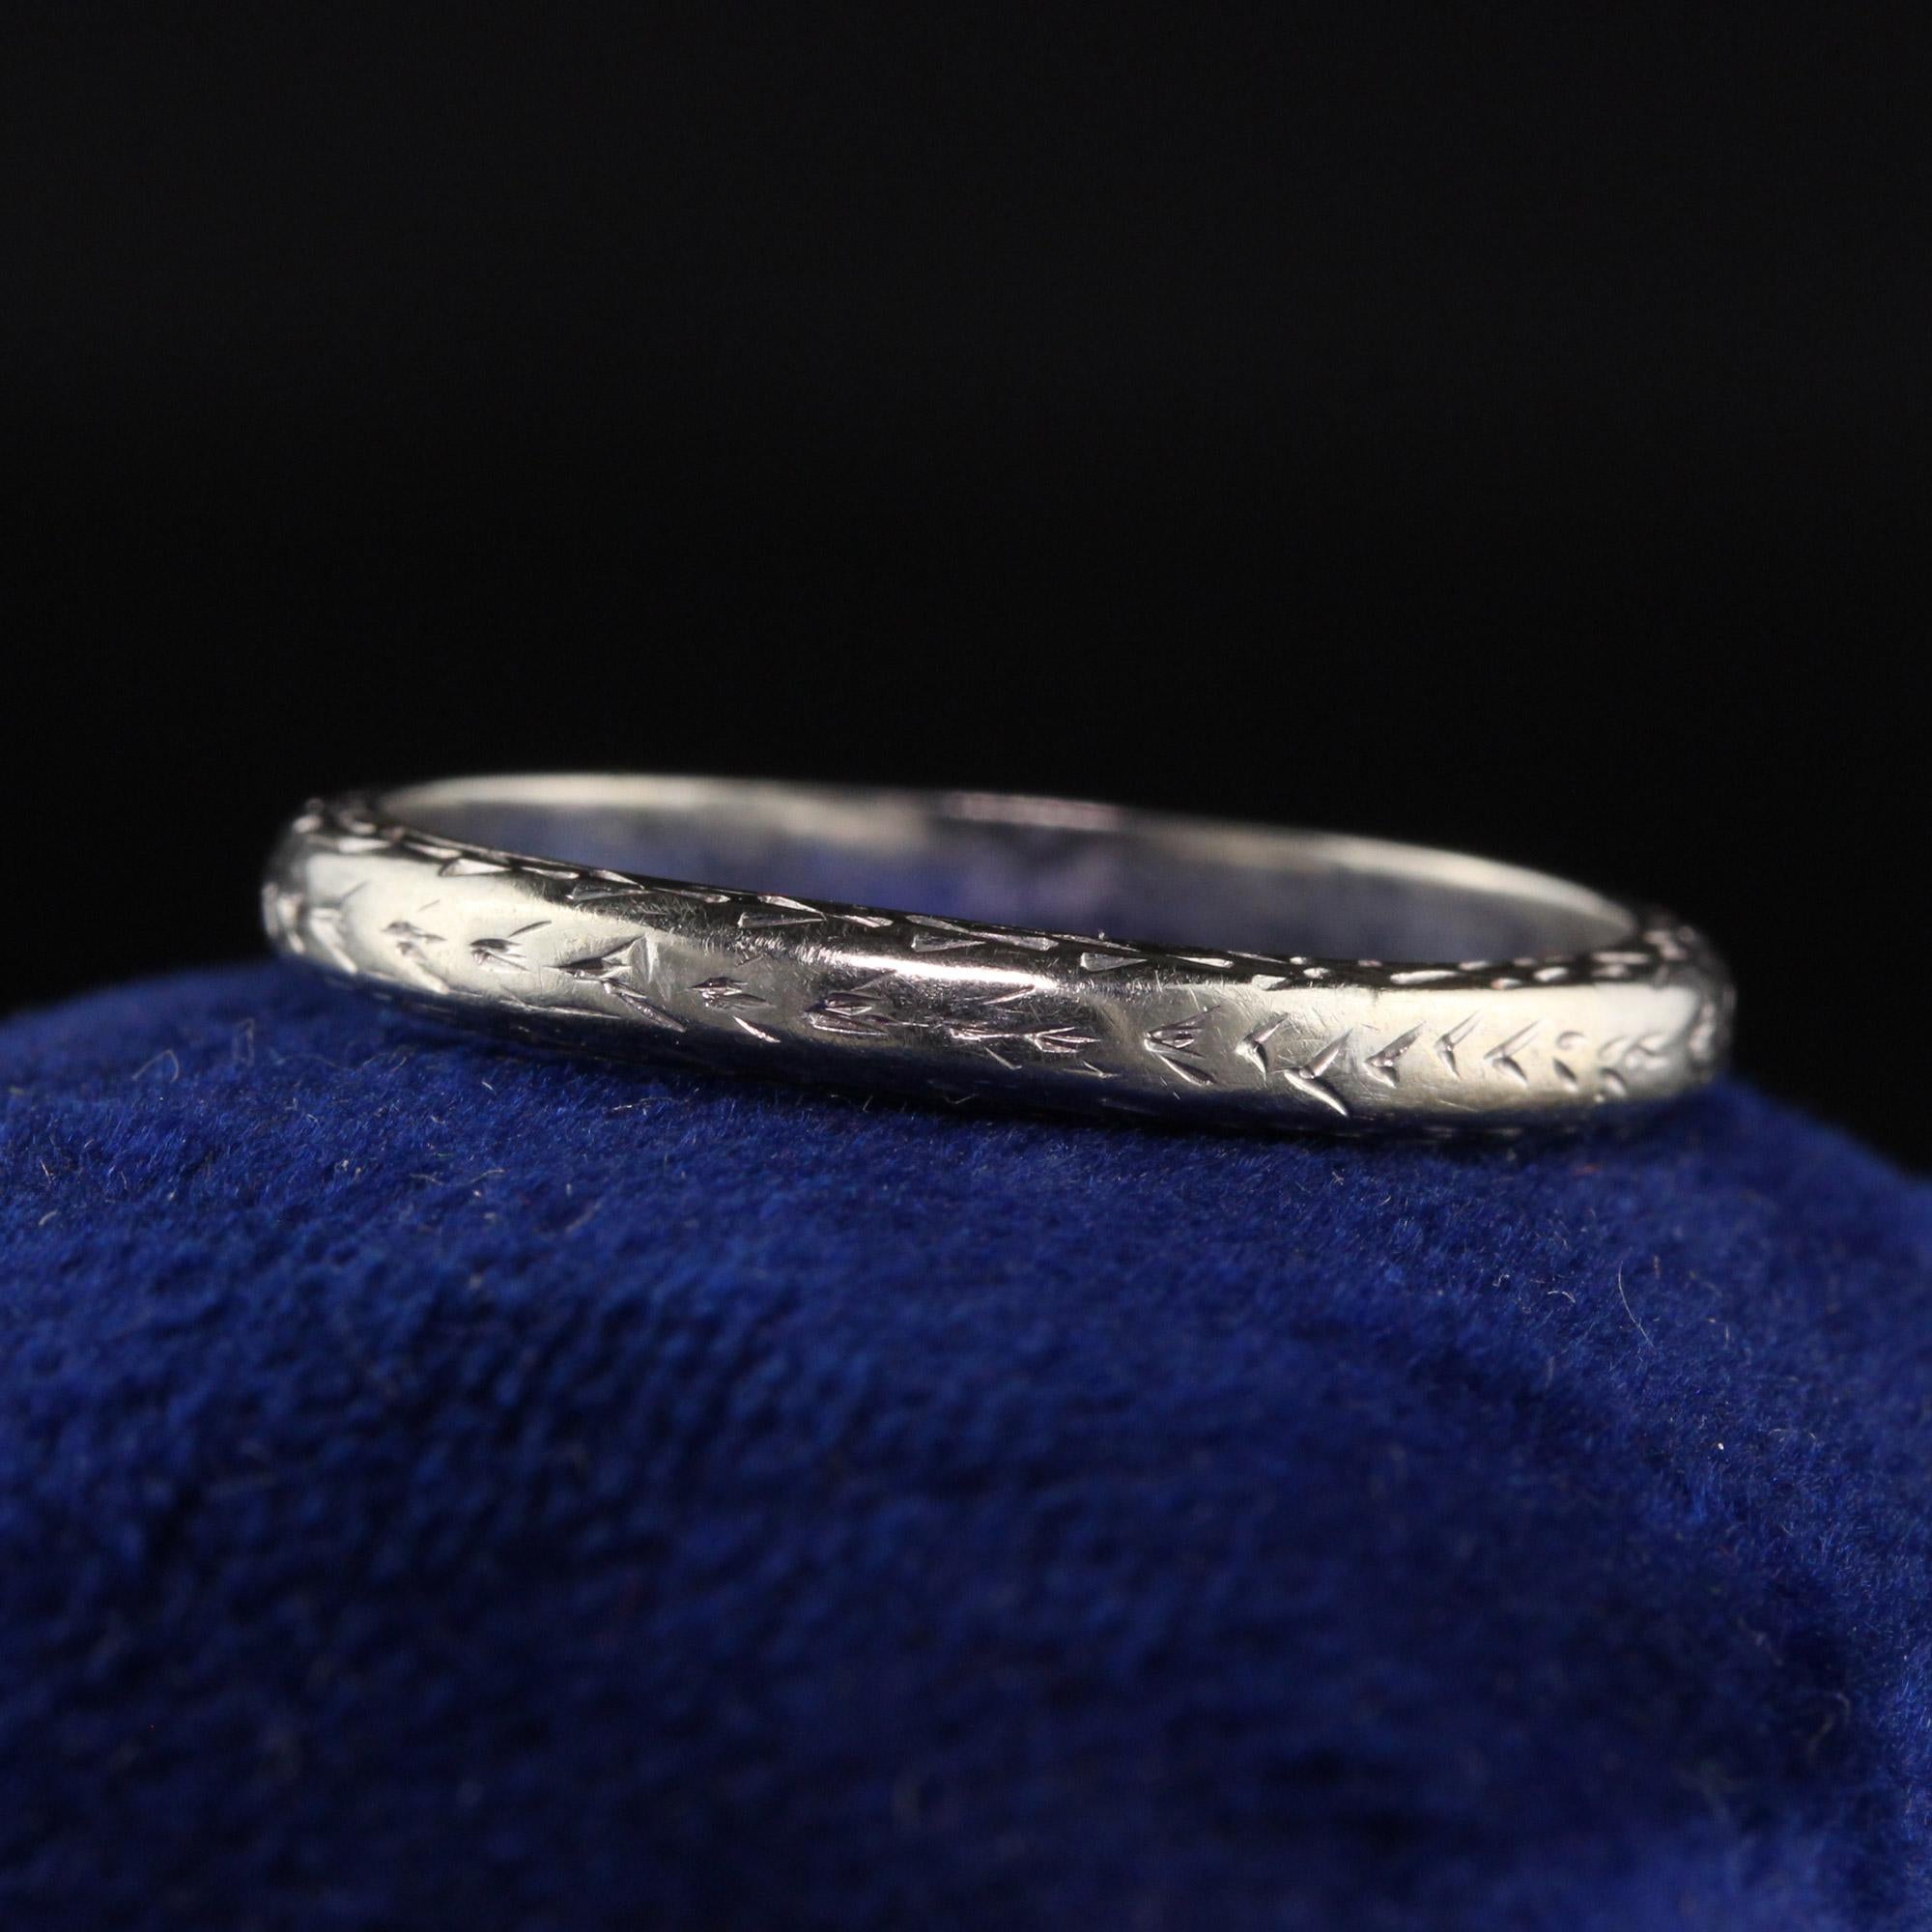 Beautiful Antique Art Deco 18K White Gold Engraved Wedding Band - Size 6. This gorgeous wedding band is crafted in 18k white gold. It is beautifully engraved around the entire ring and is in great condition.

Item #R1265

Metal: 18K White